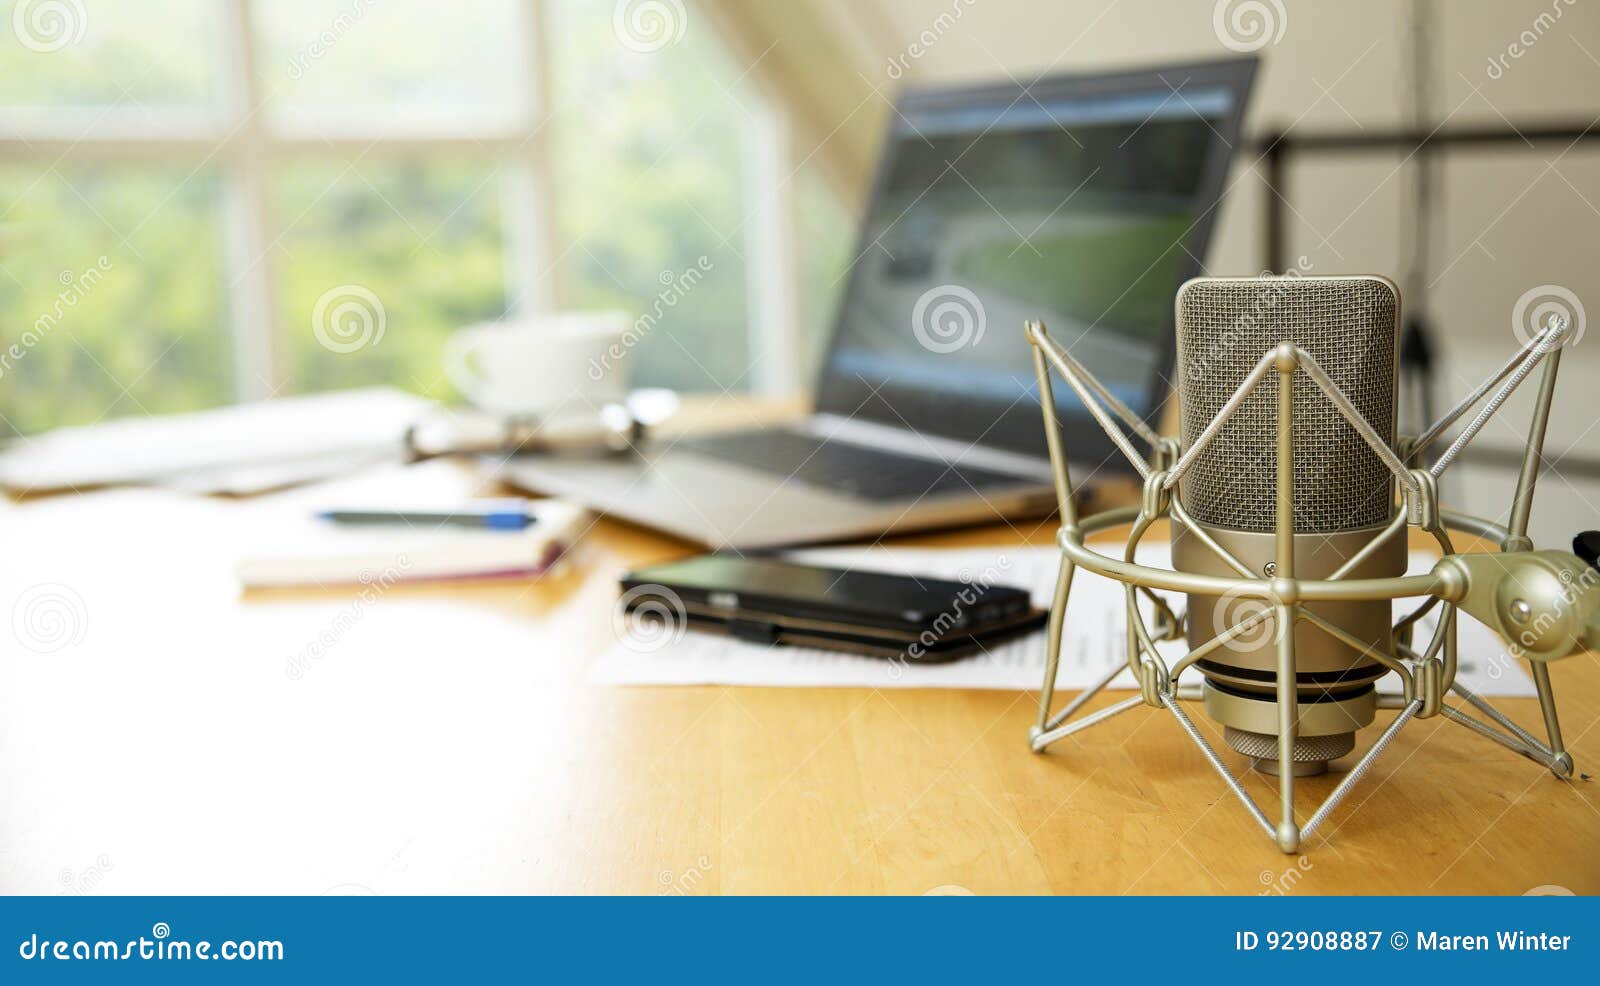 workspace for journalism with condenser microphone, laptop, cell